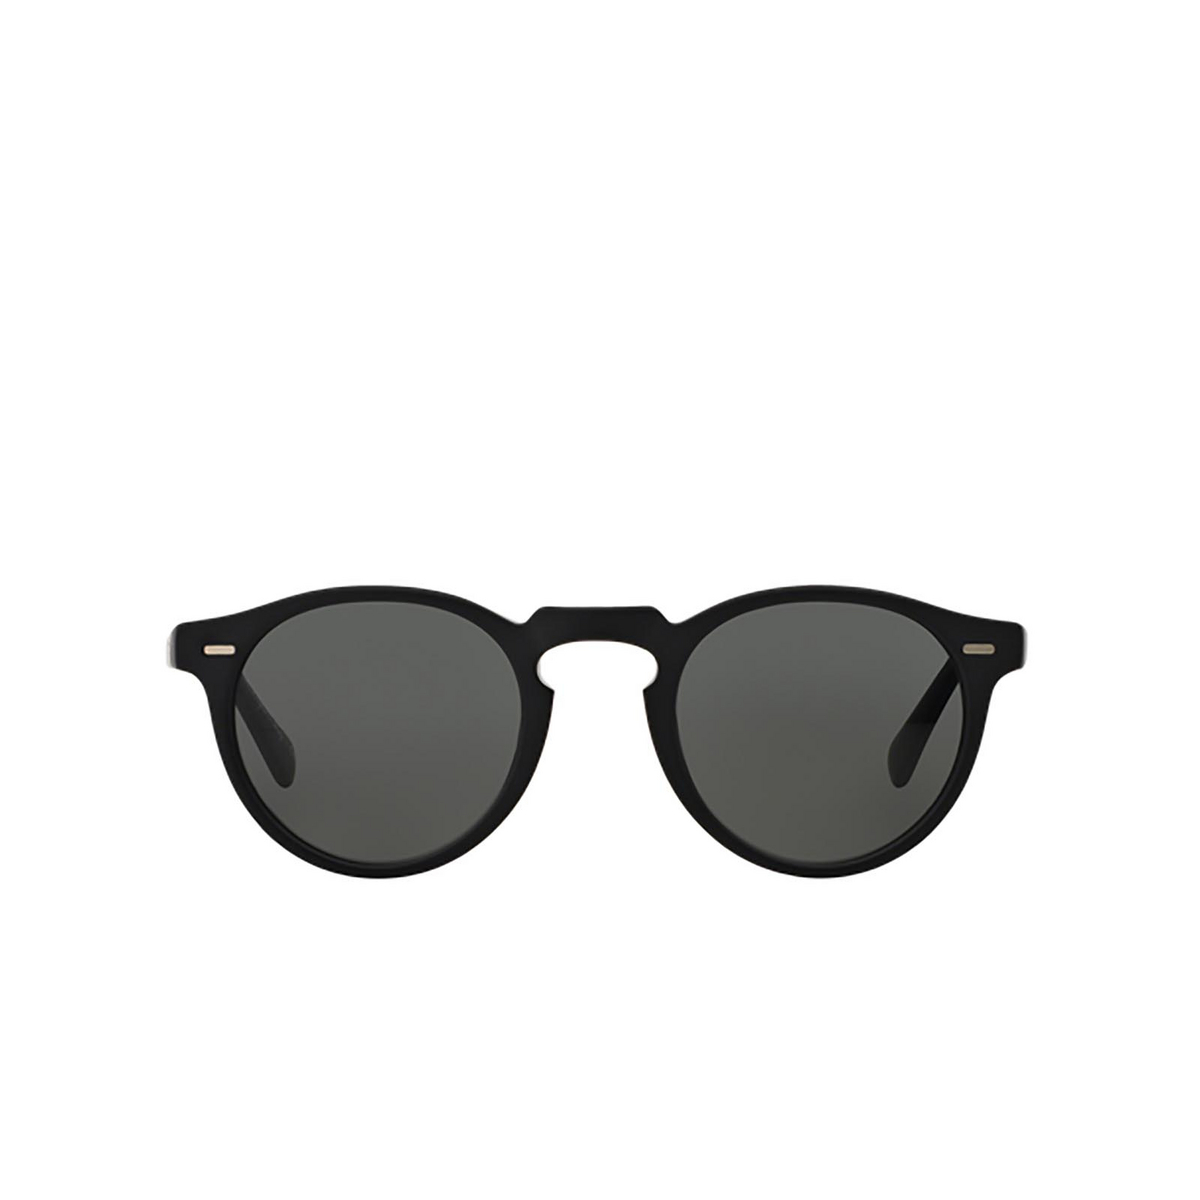 Oliver Peoples GREGORY PECK Sunglasses 1031P2 Semi Matte Black - front view